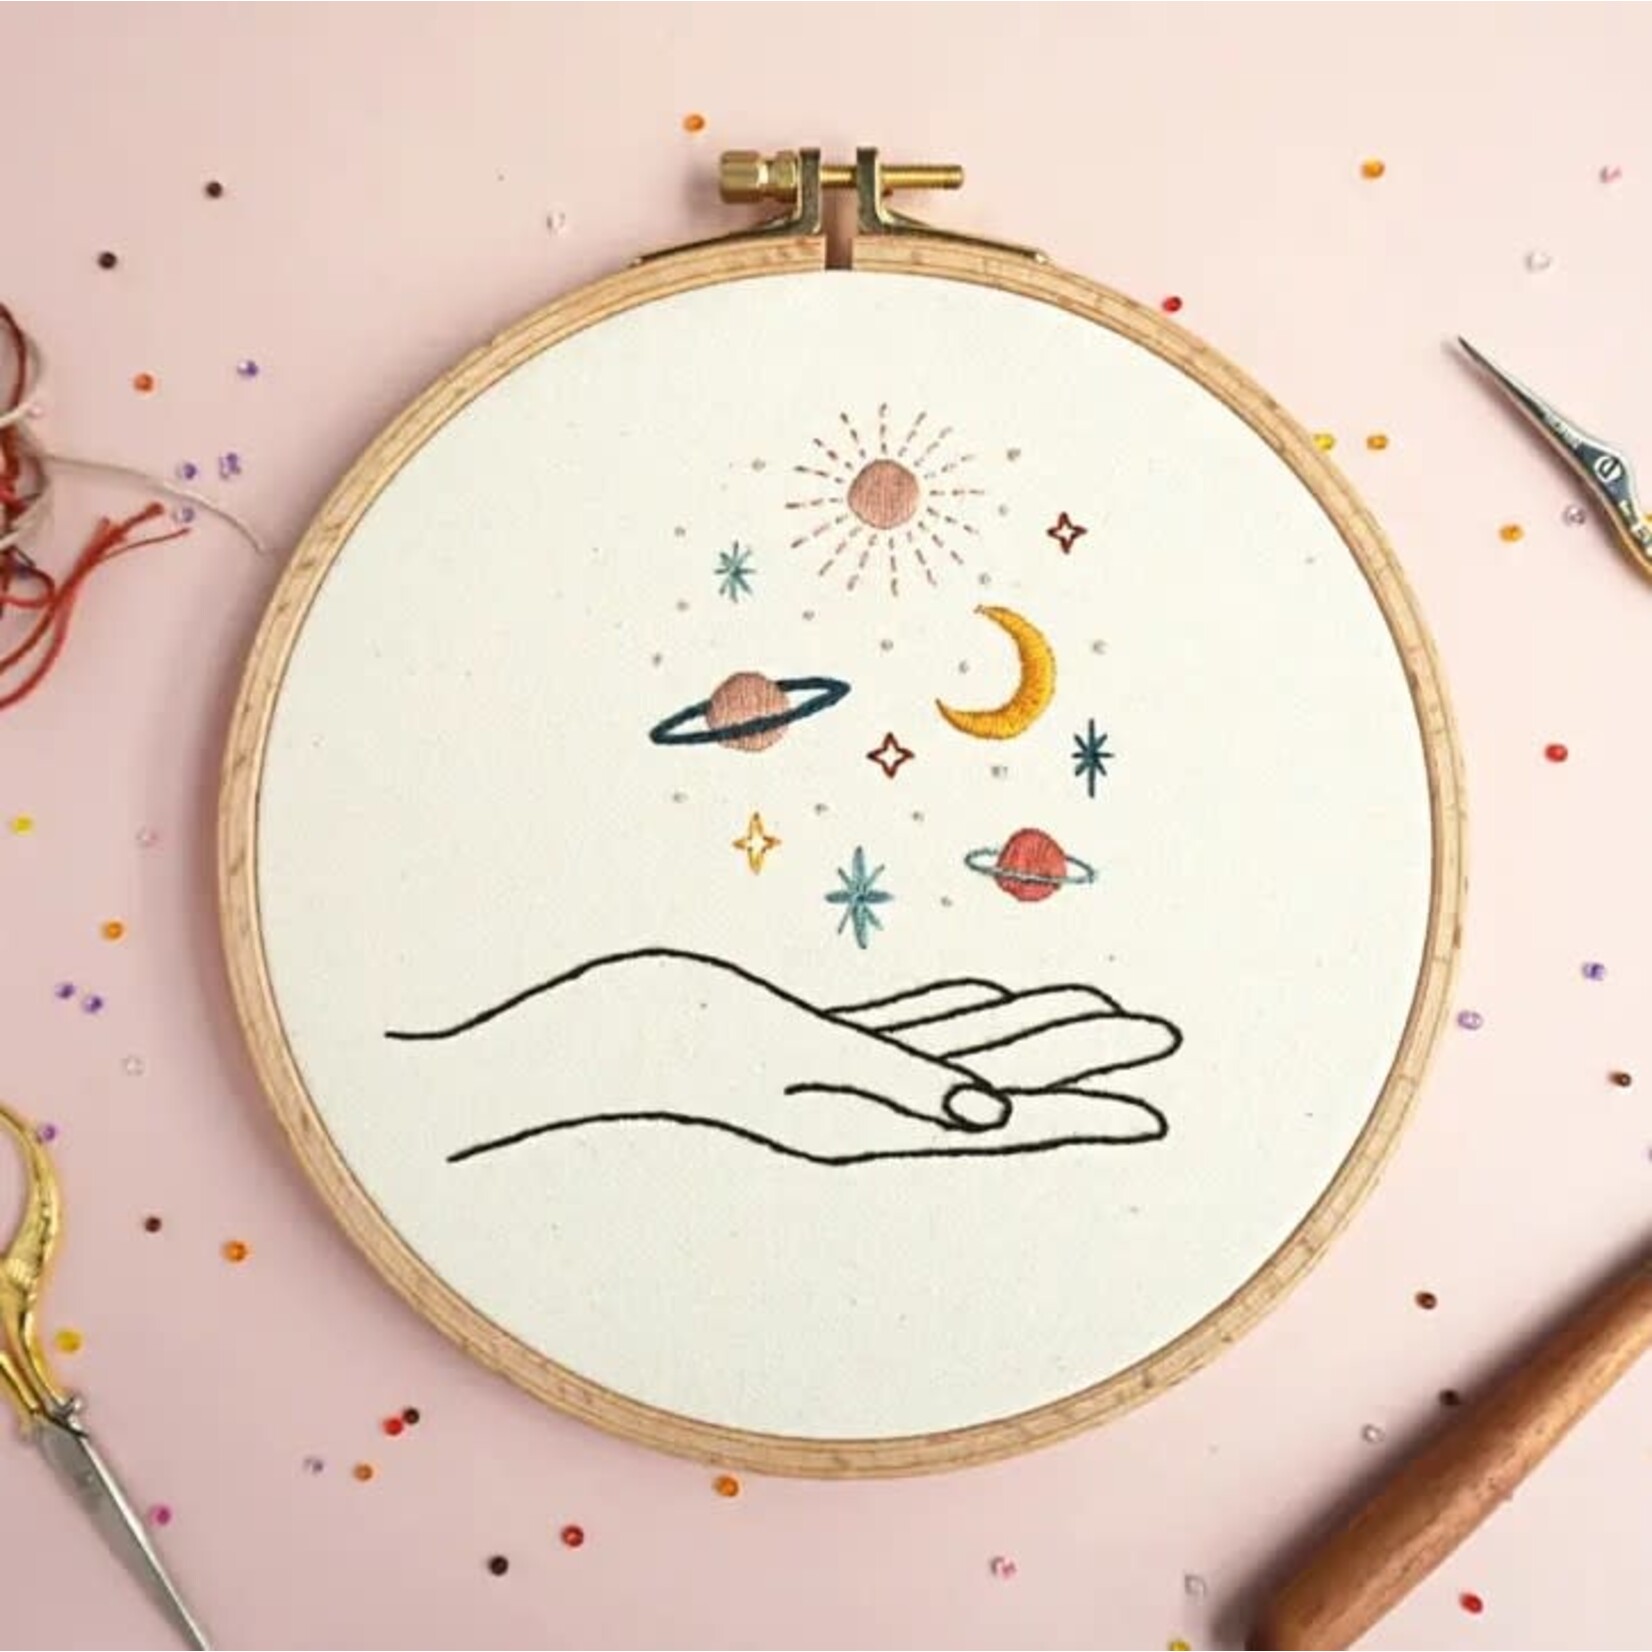 Handful of Stars DIY Embroidery Craft Kit